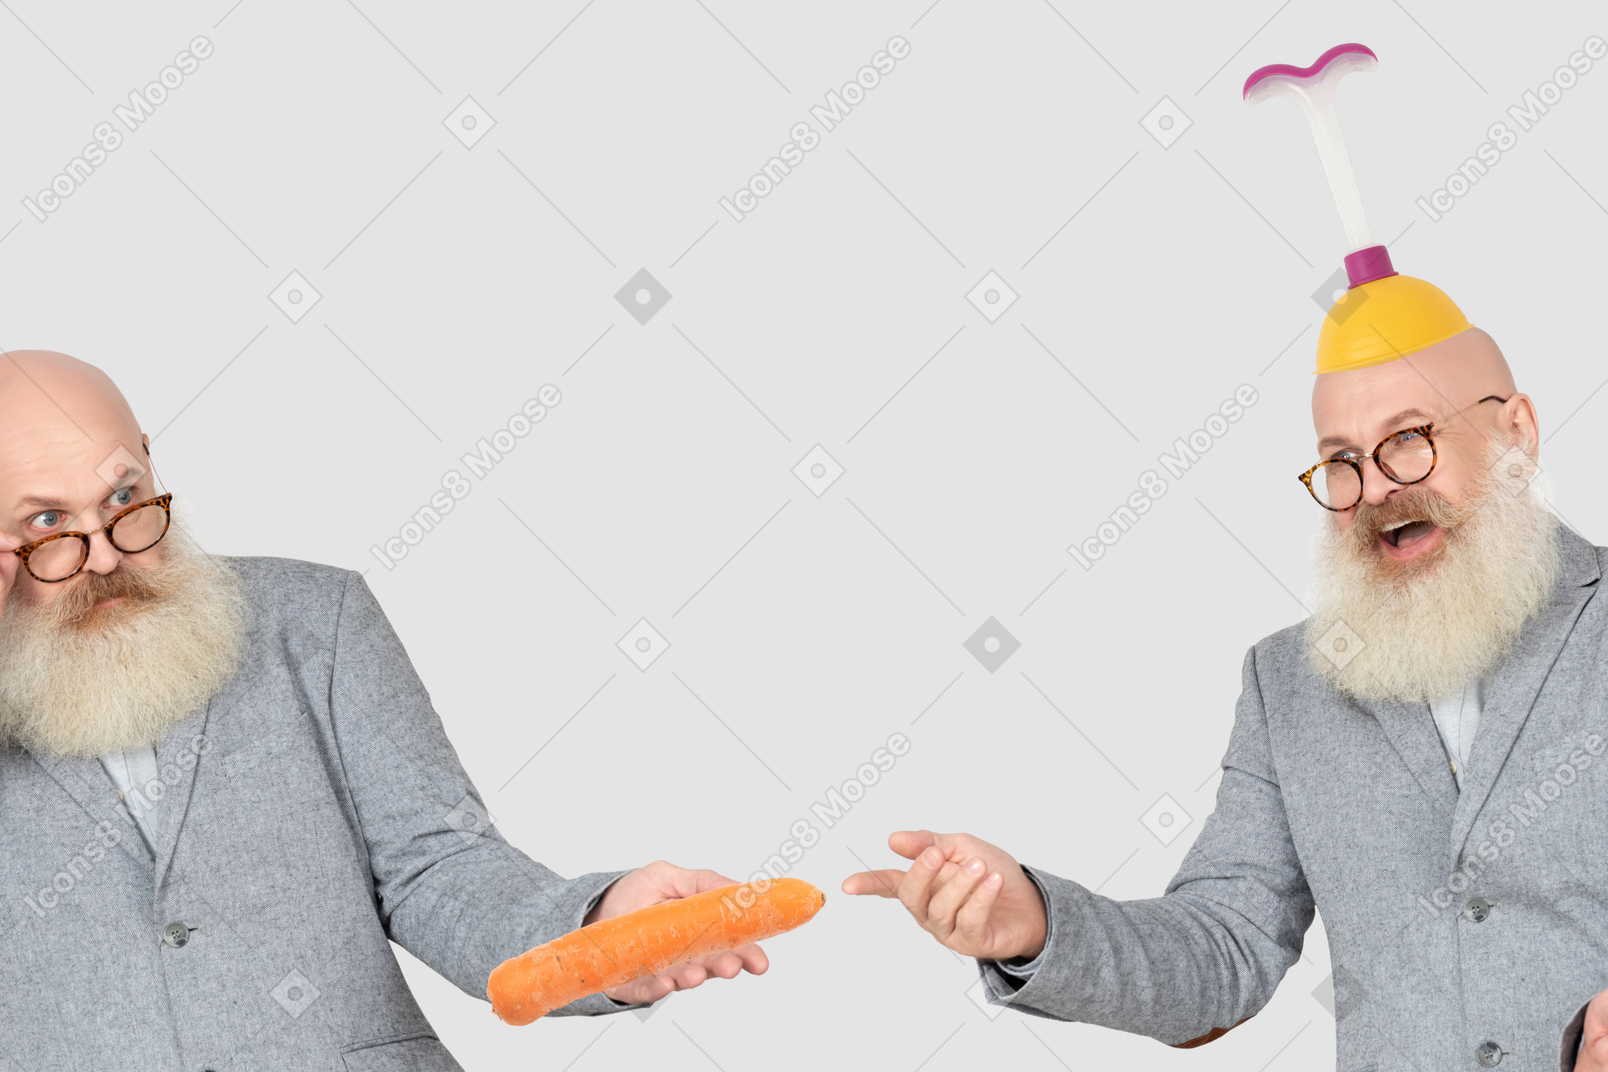 Man giving a carrot to another man with a plunger on his head